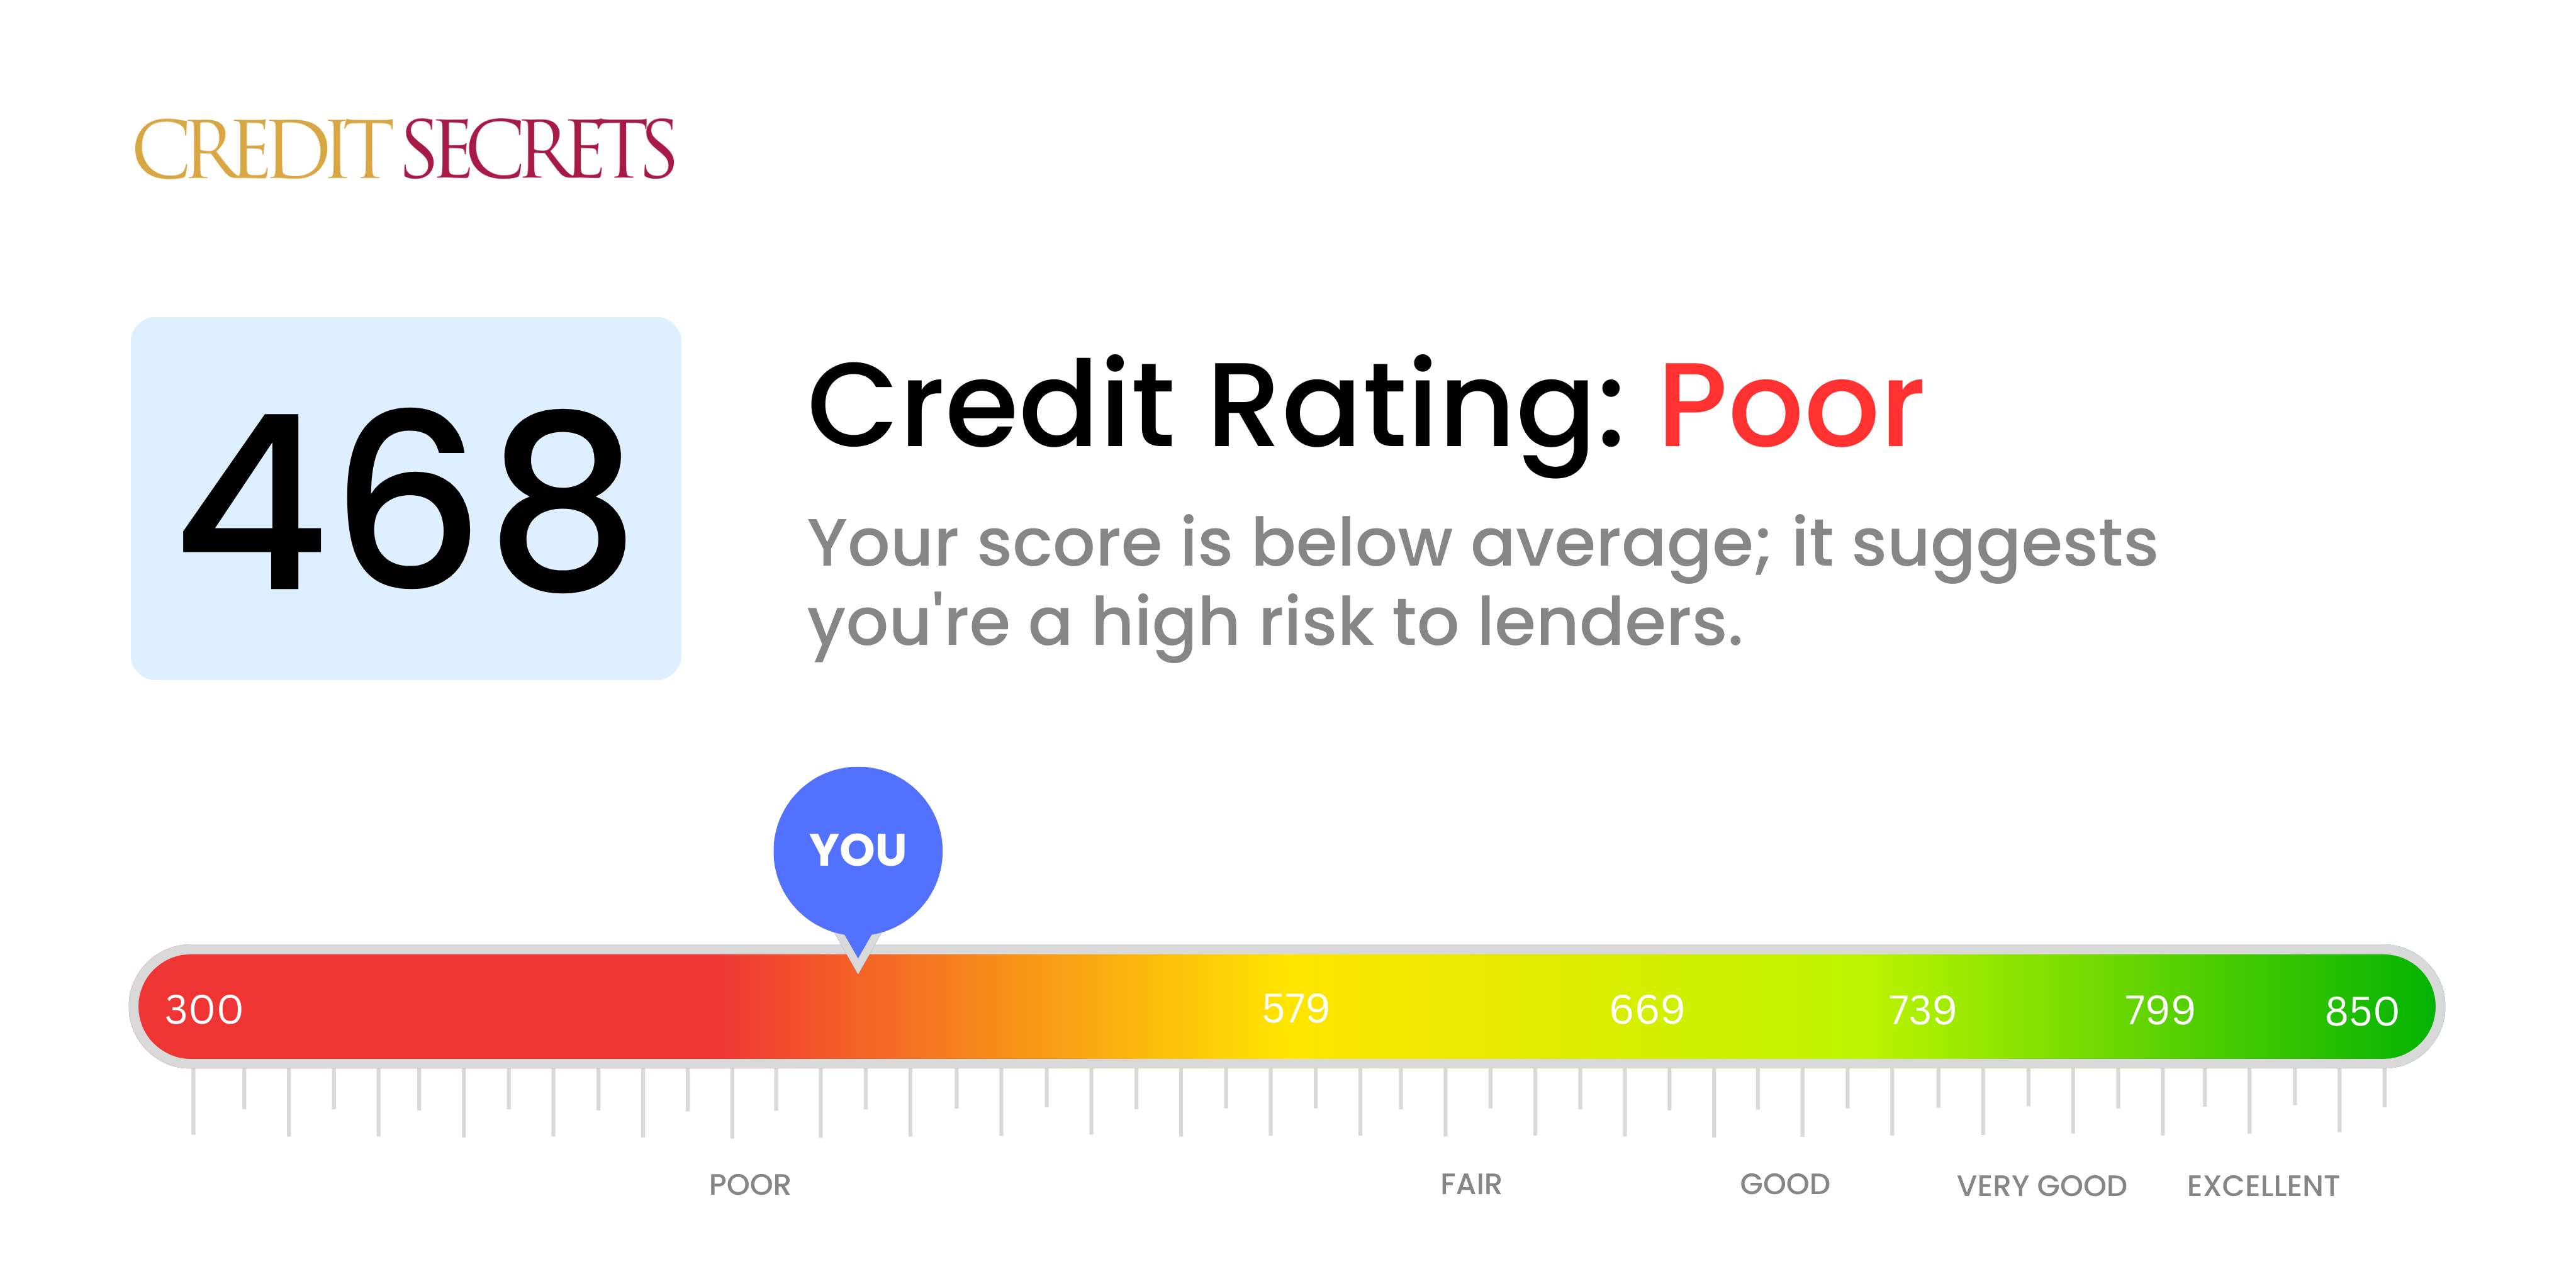 Is 468 a good credit score?